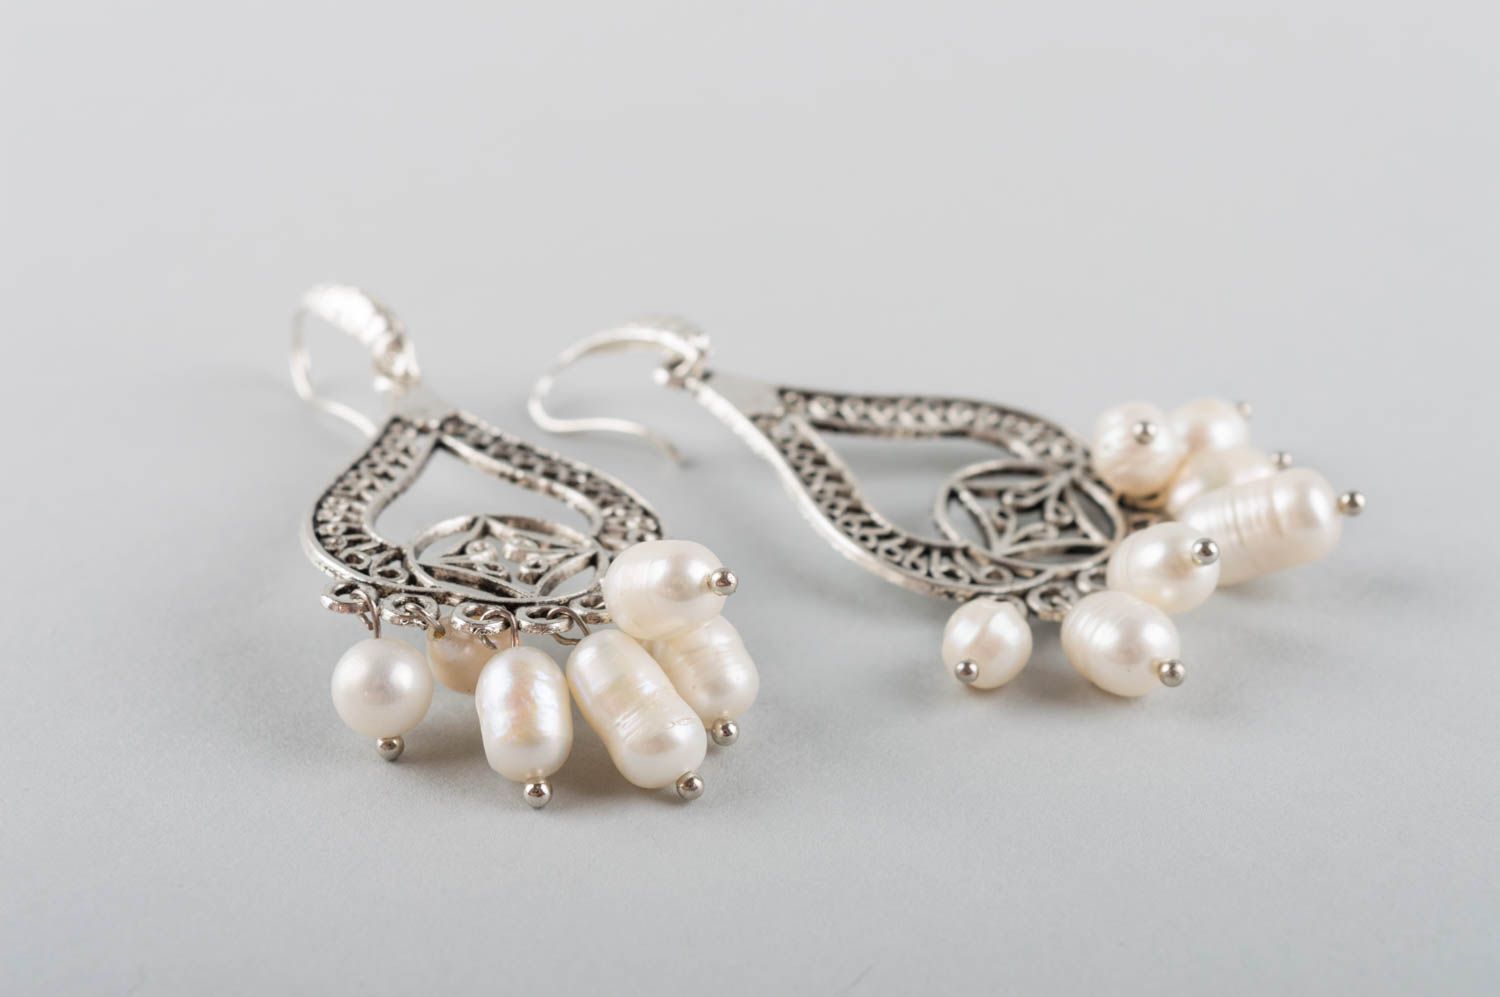 Women's stylish handmade metal earrings with natural stones White Pearls photo 4